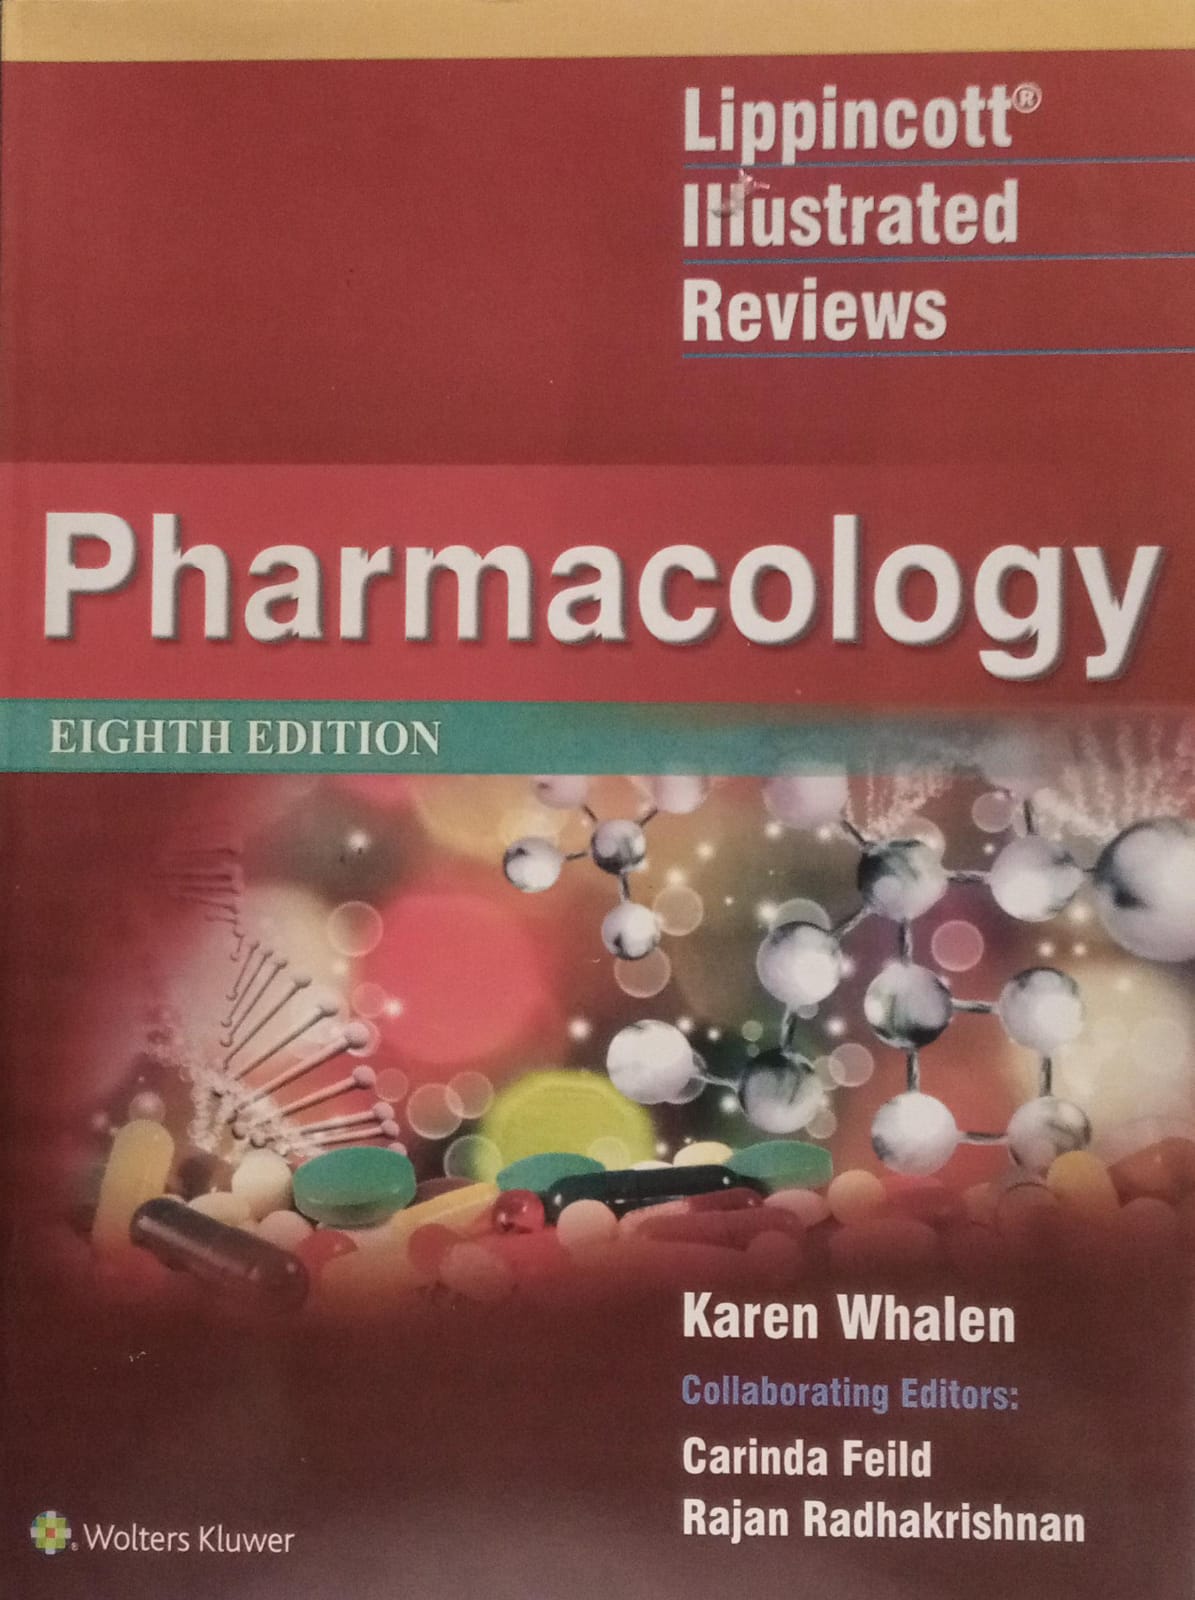 lippincotts illustrated reviews pharmacology 4th edition pdf download